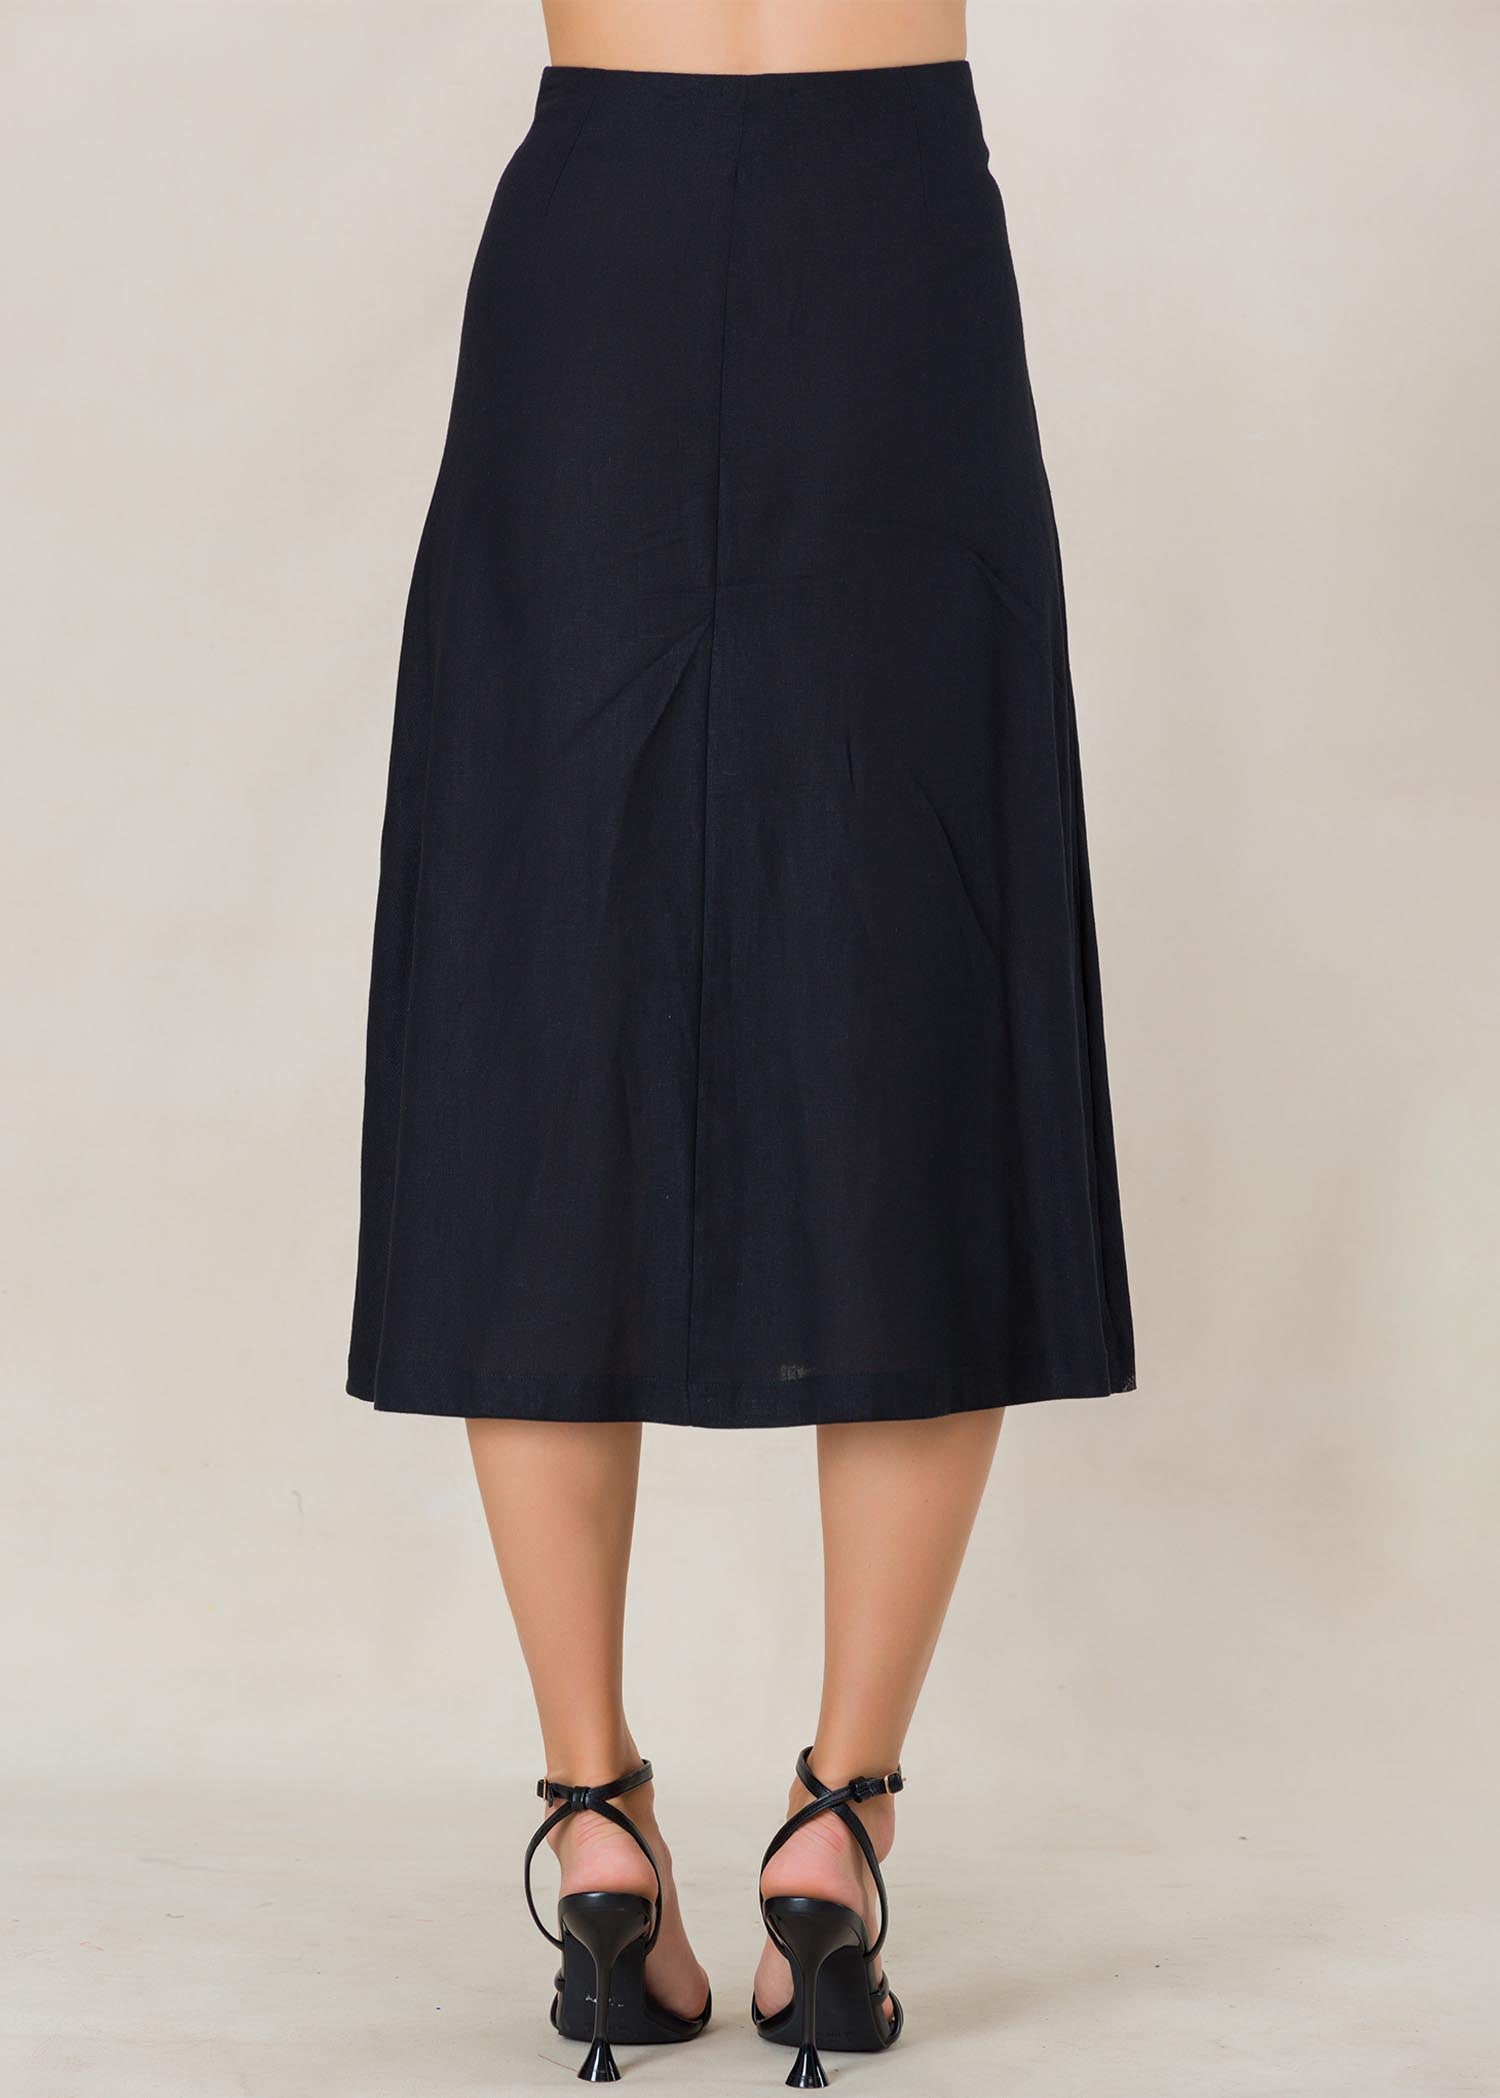 Linen skirt with front inverted pleat